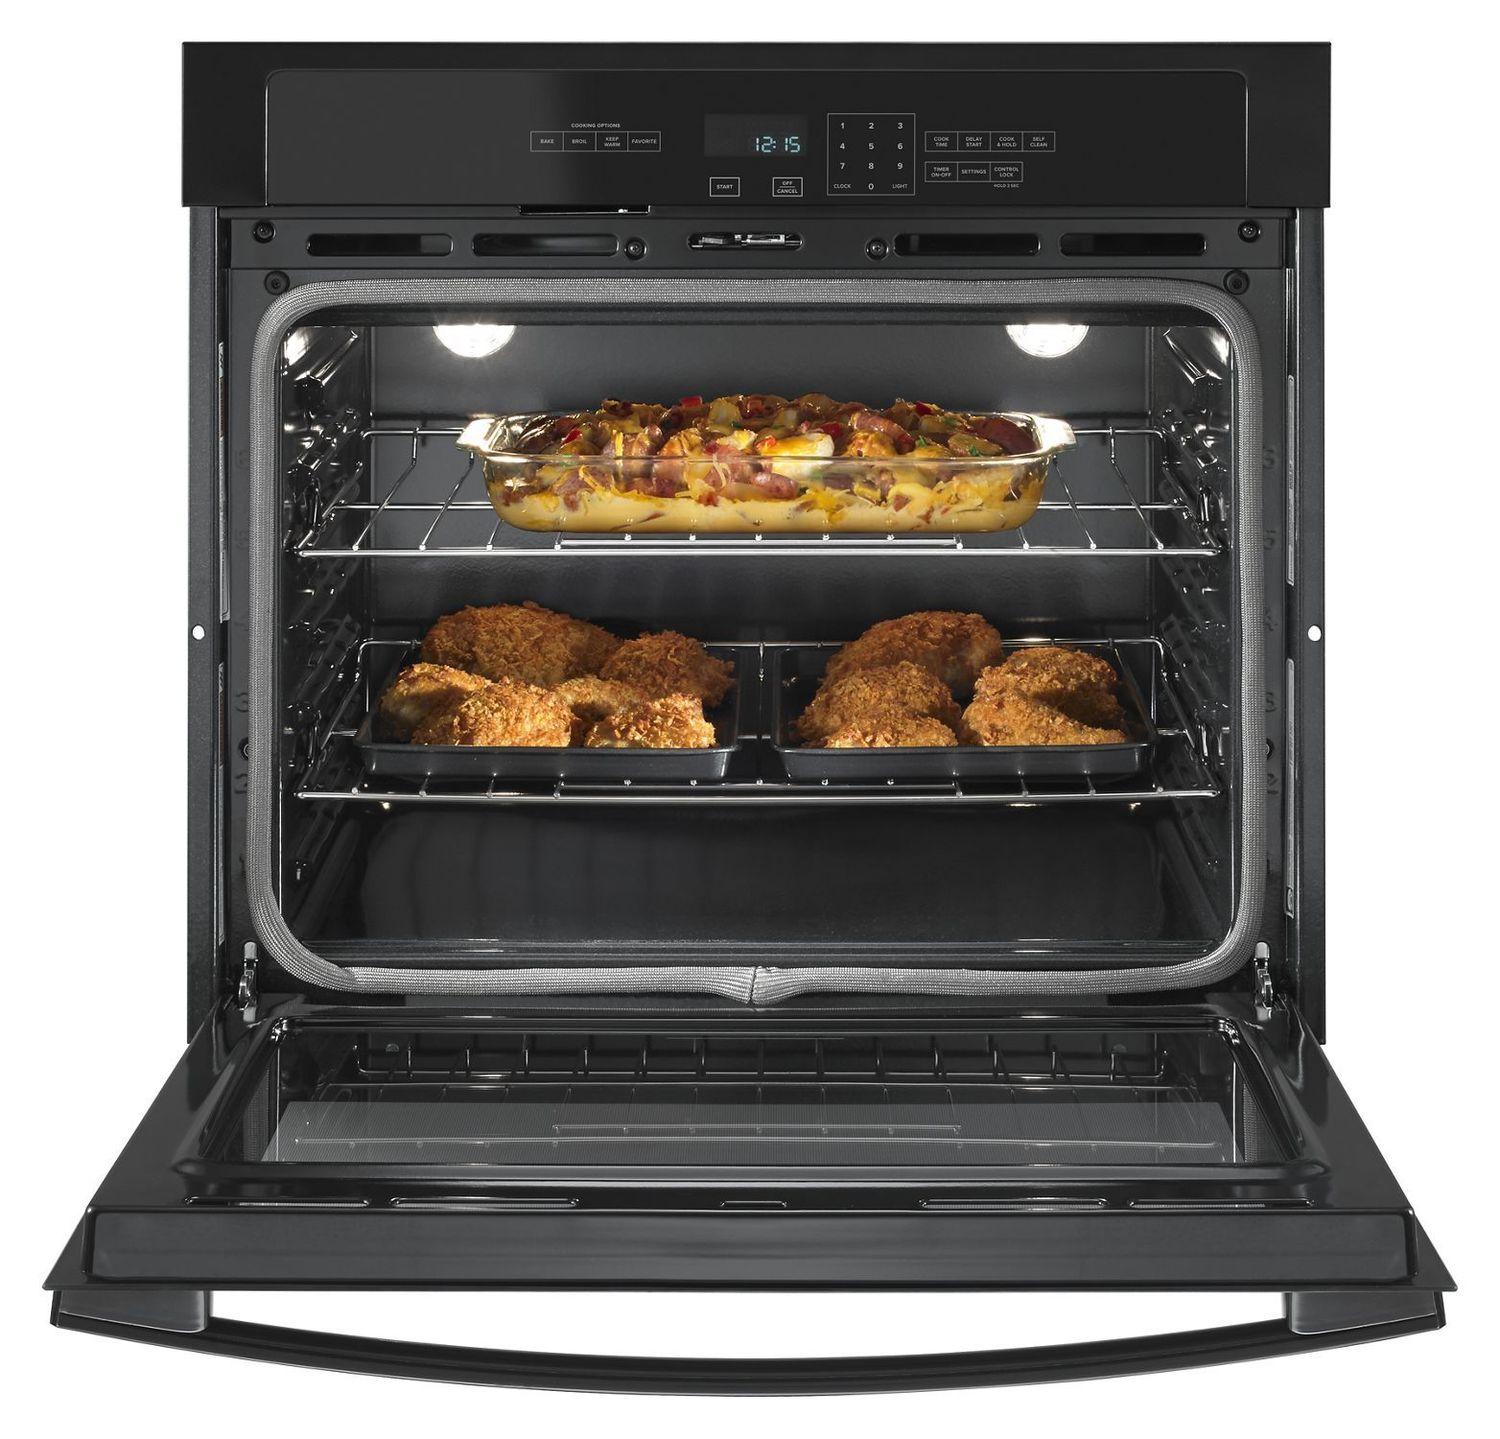 4.3 cu. ft. SIngle Thermal Wall Oven Black